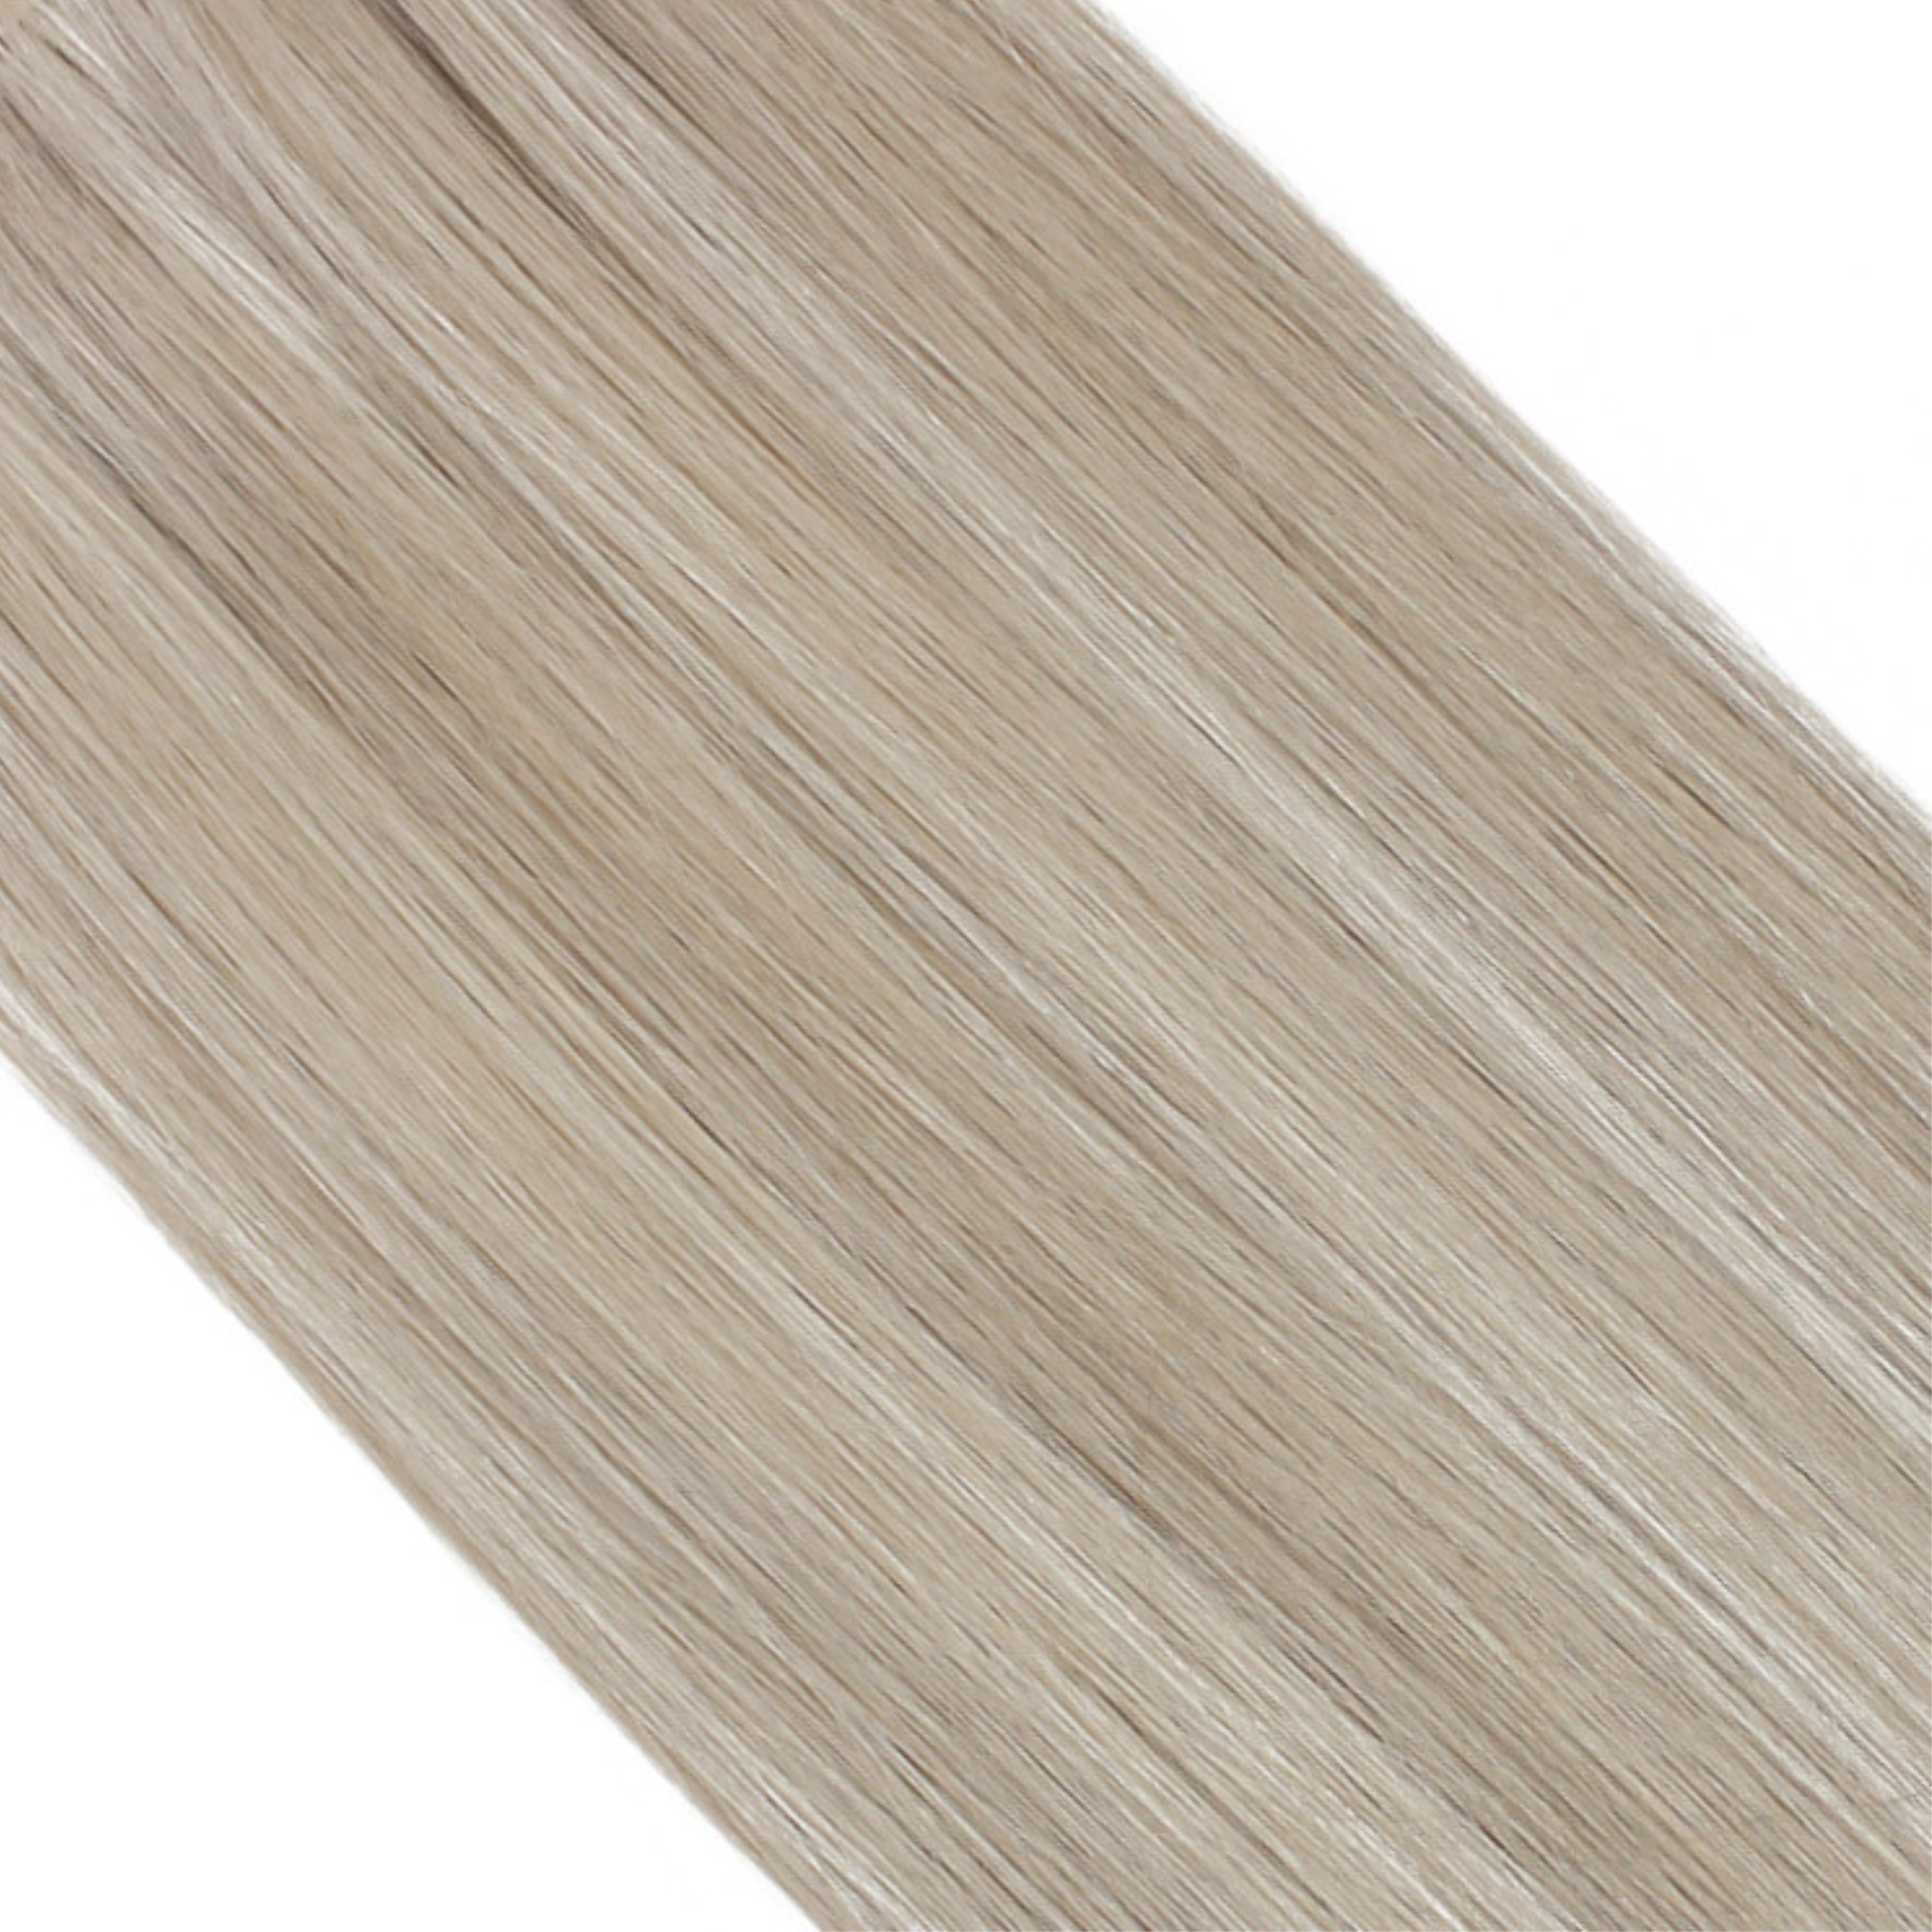 "hair rehab london 18" length 120 grams weight original clip-in hair extensions shade titled steel blonde"